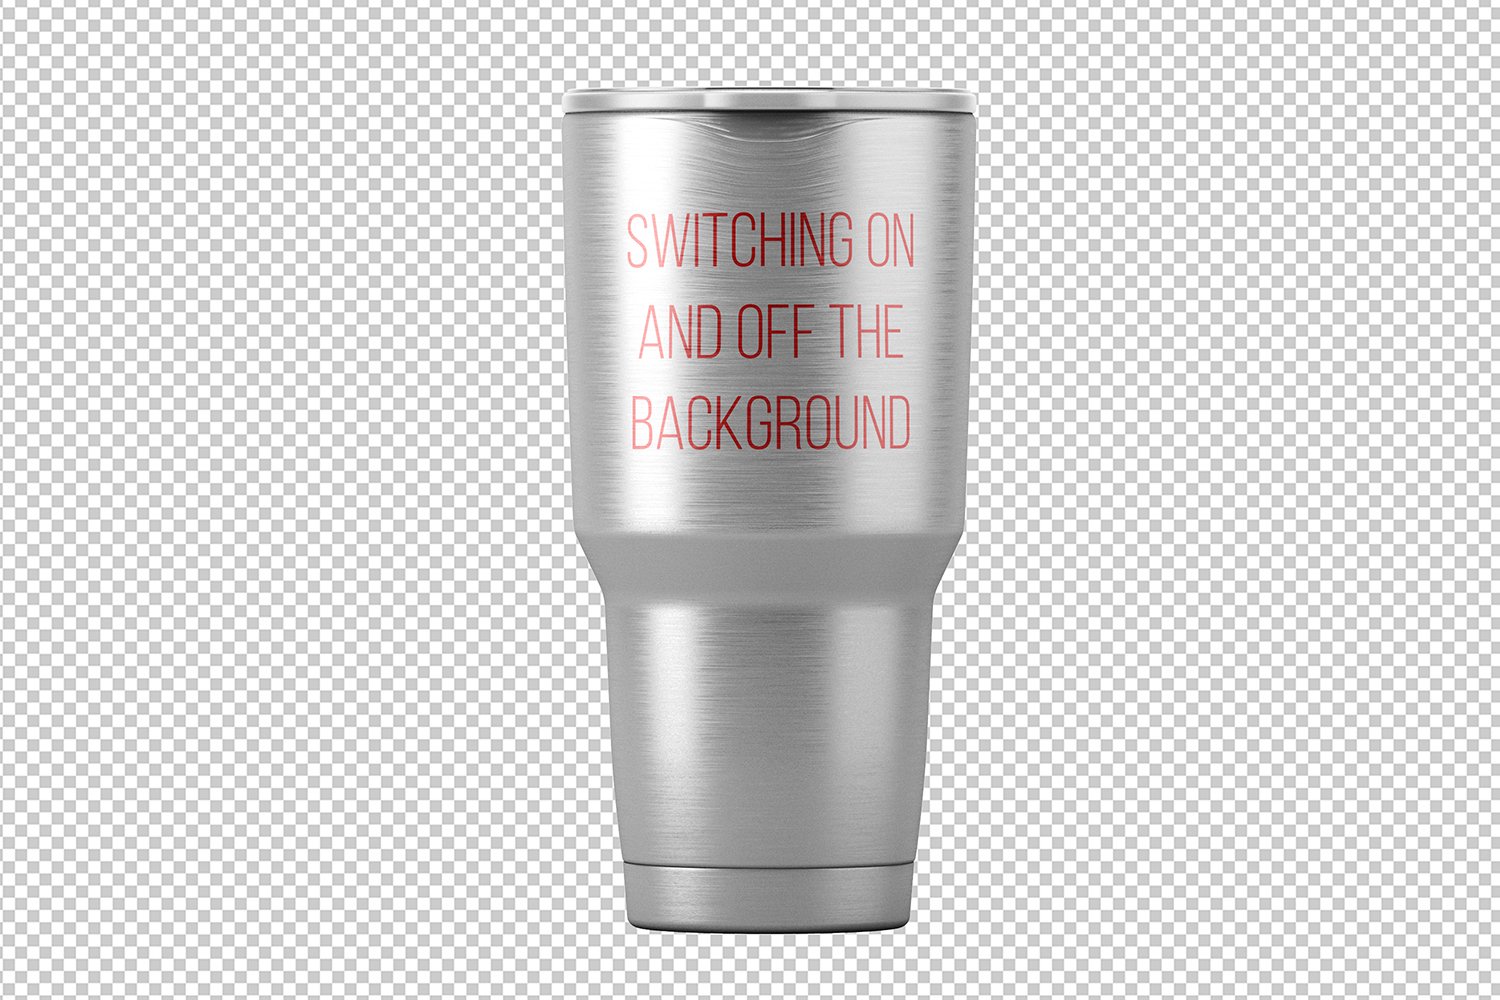 Metallic yeti cup with some description by red font.